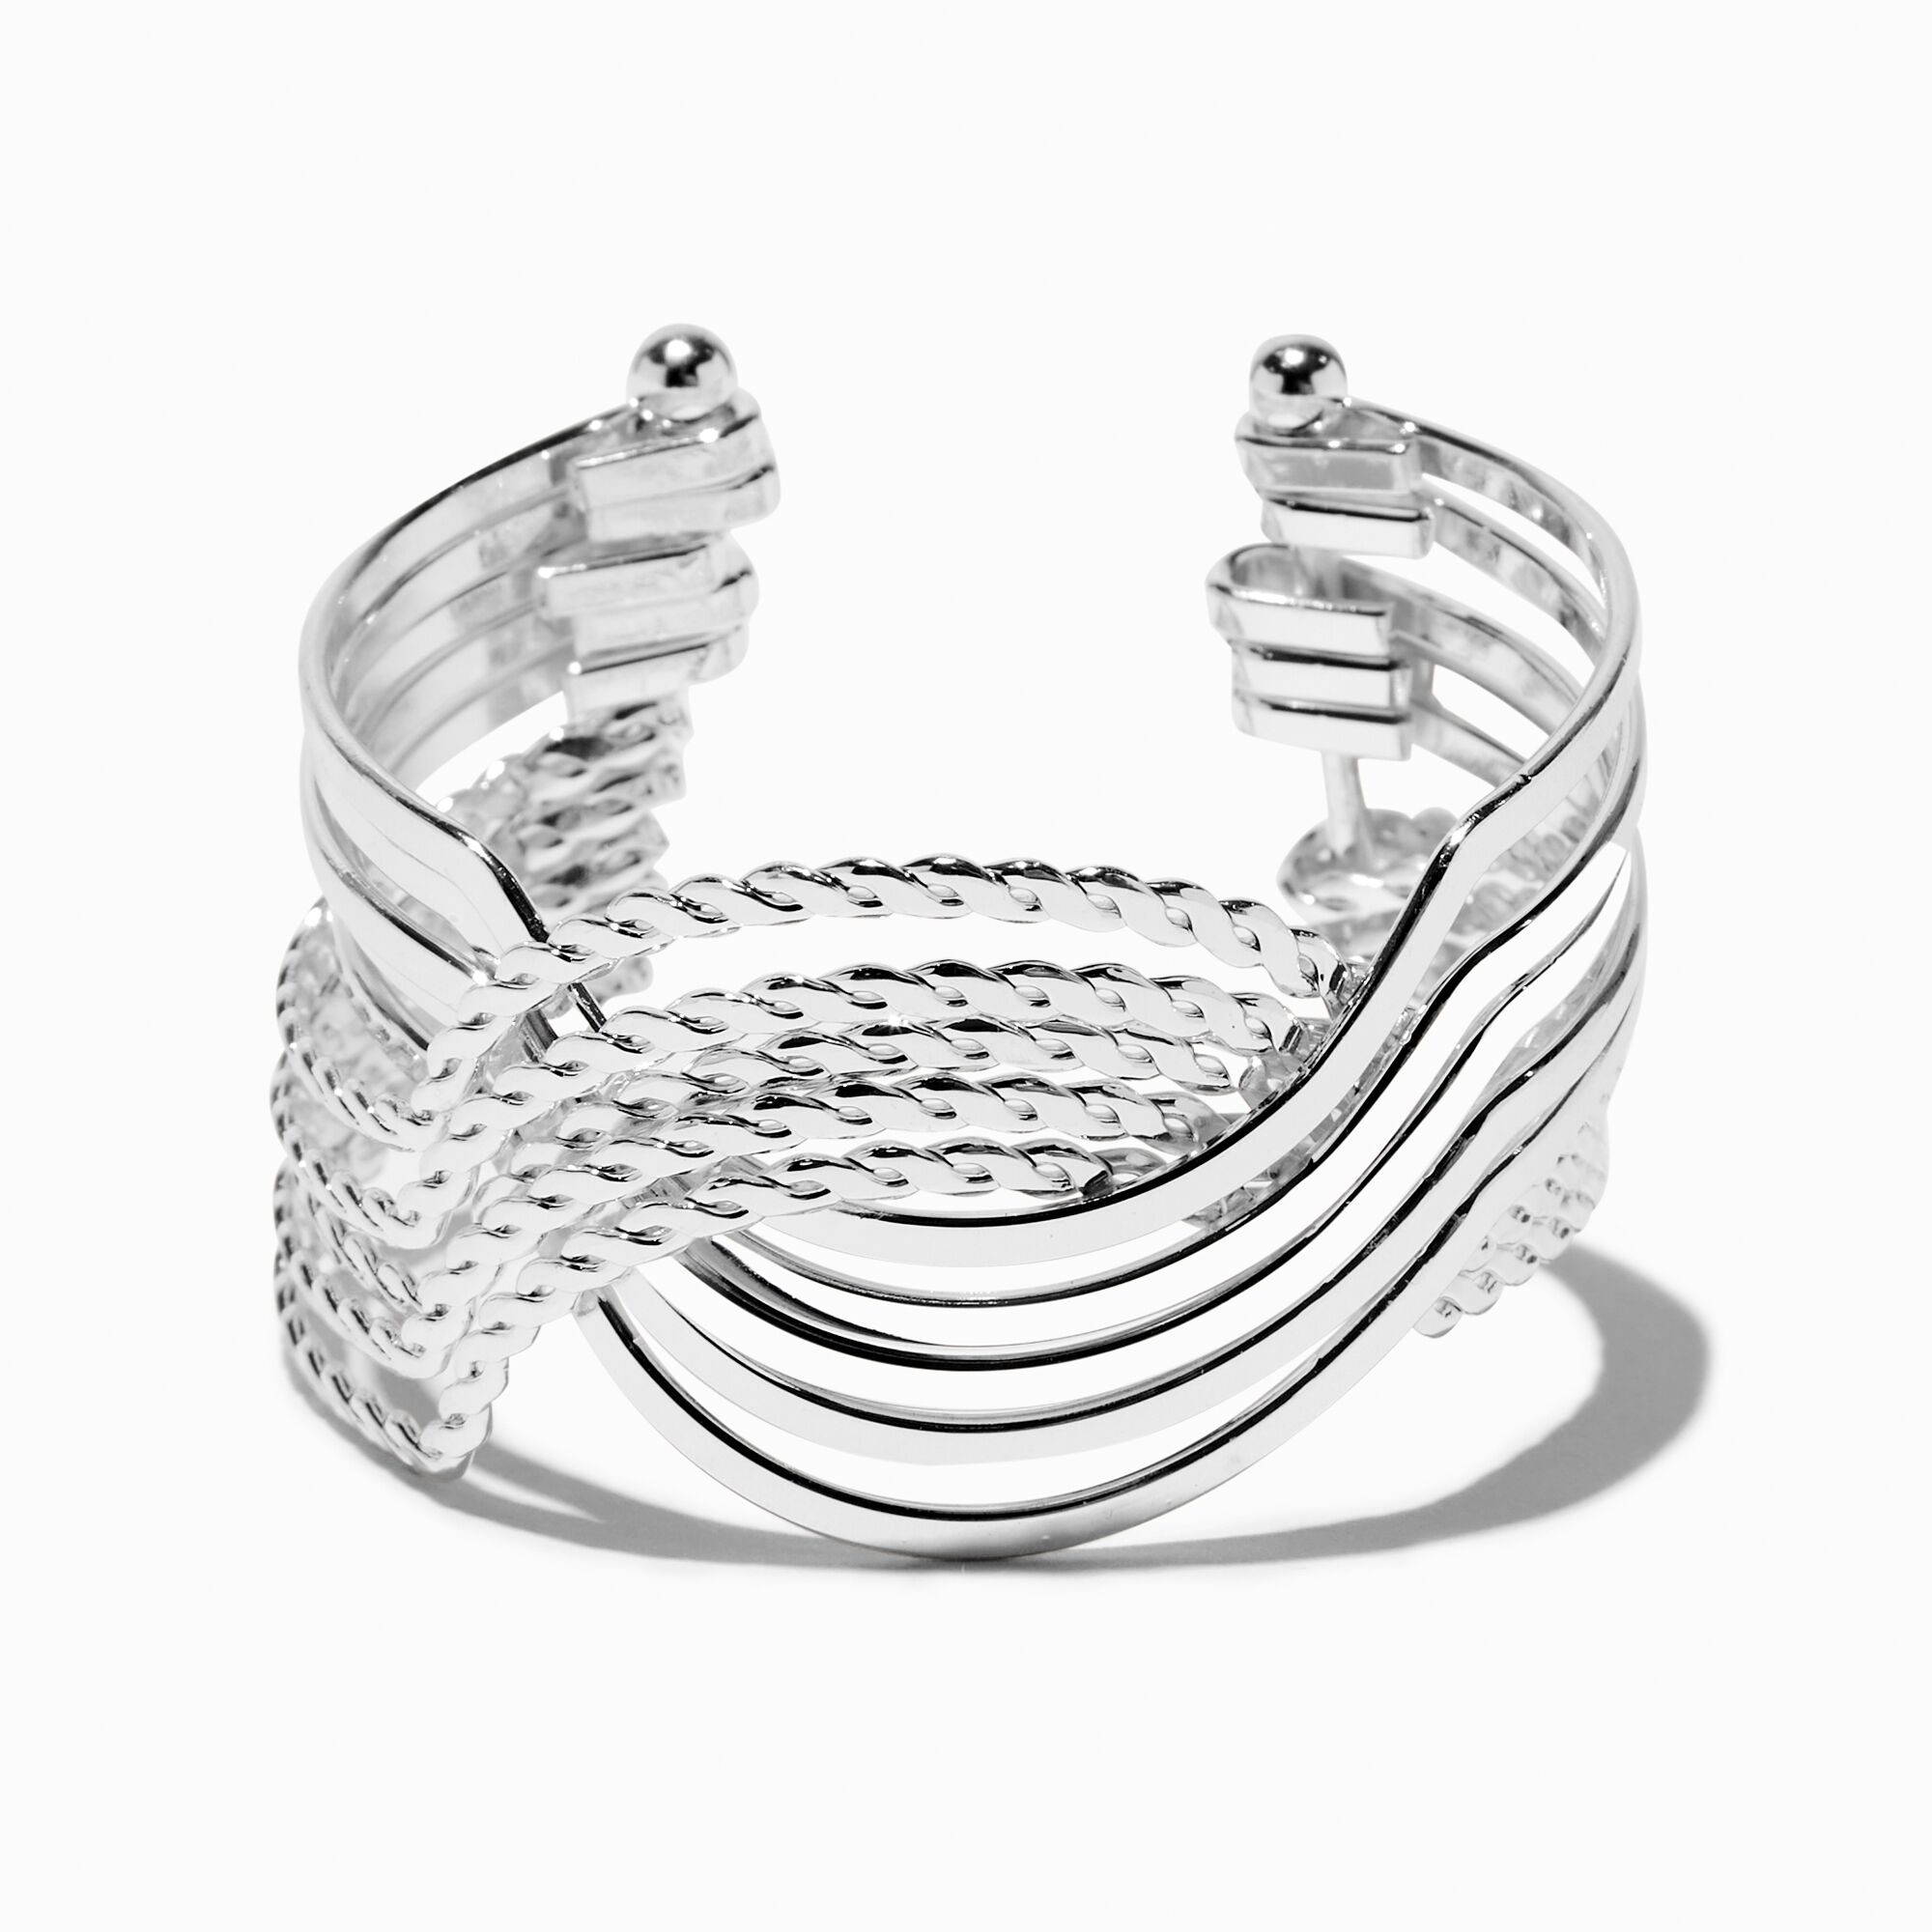 View Claires Tone Extended Length Braided Woven Cuff Bracelet Silver information